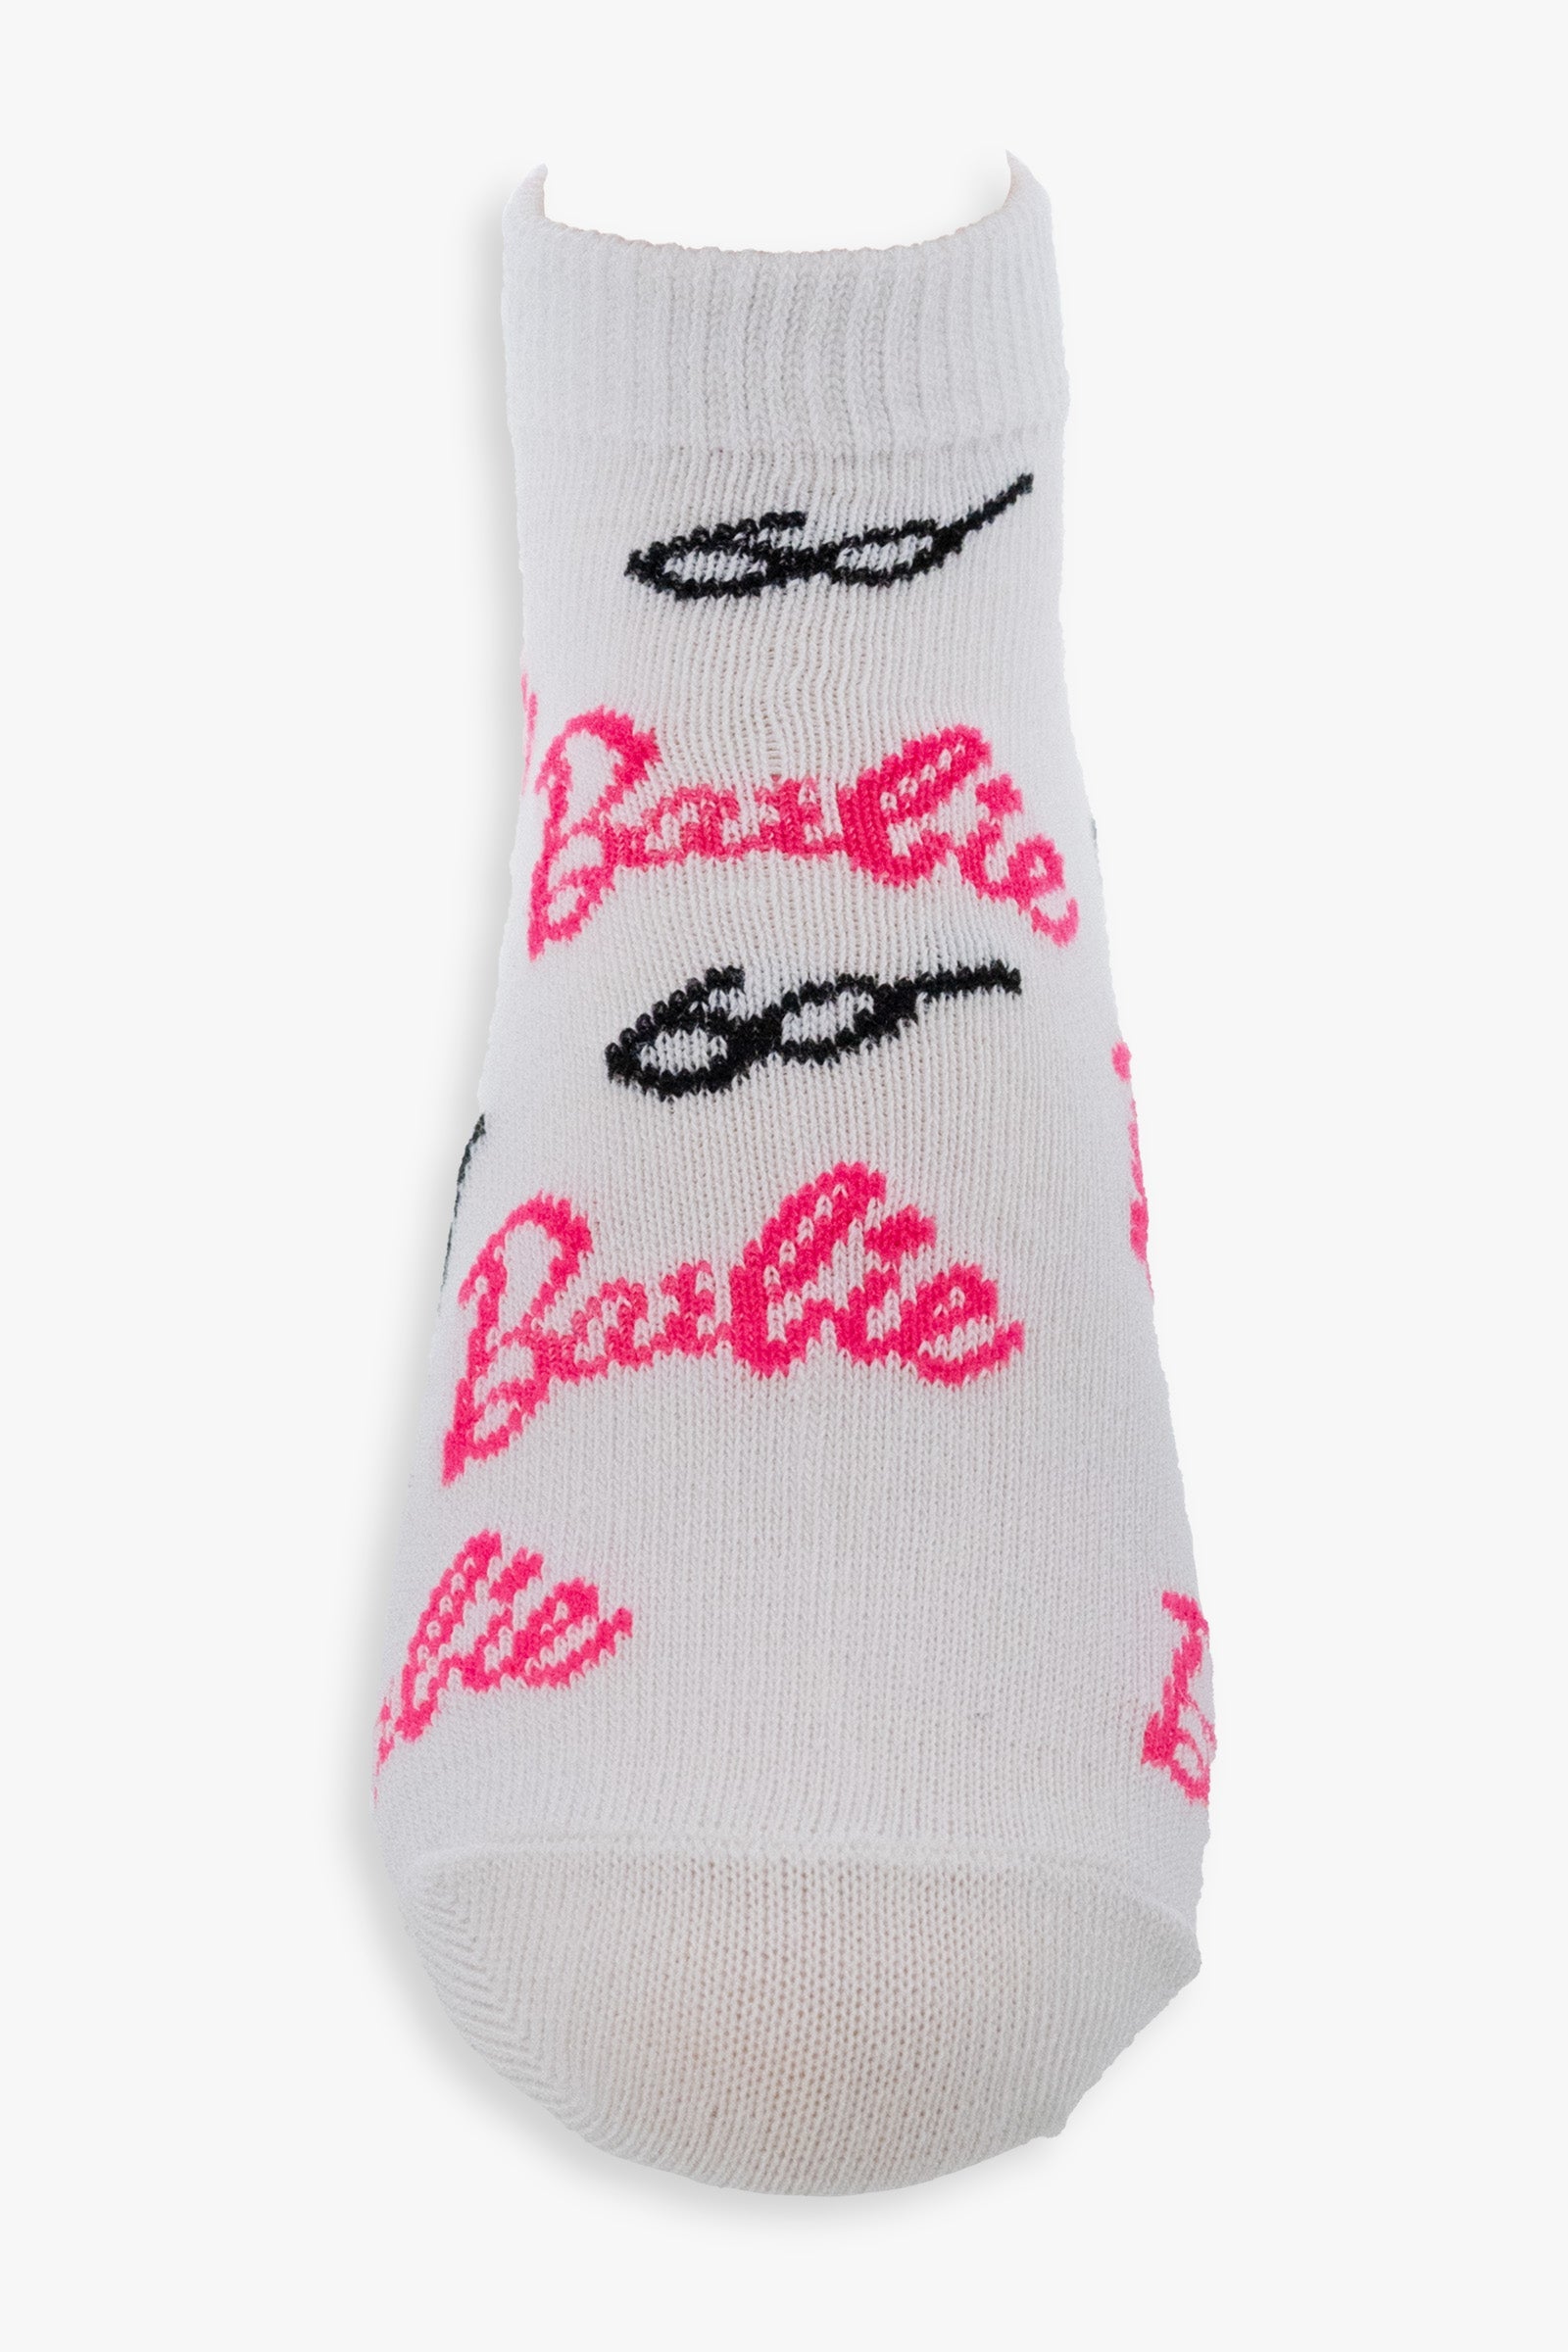 Gertex Barbie Youth Girls 3-Pack No-Show Ankle Socks